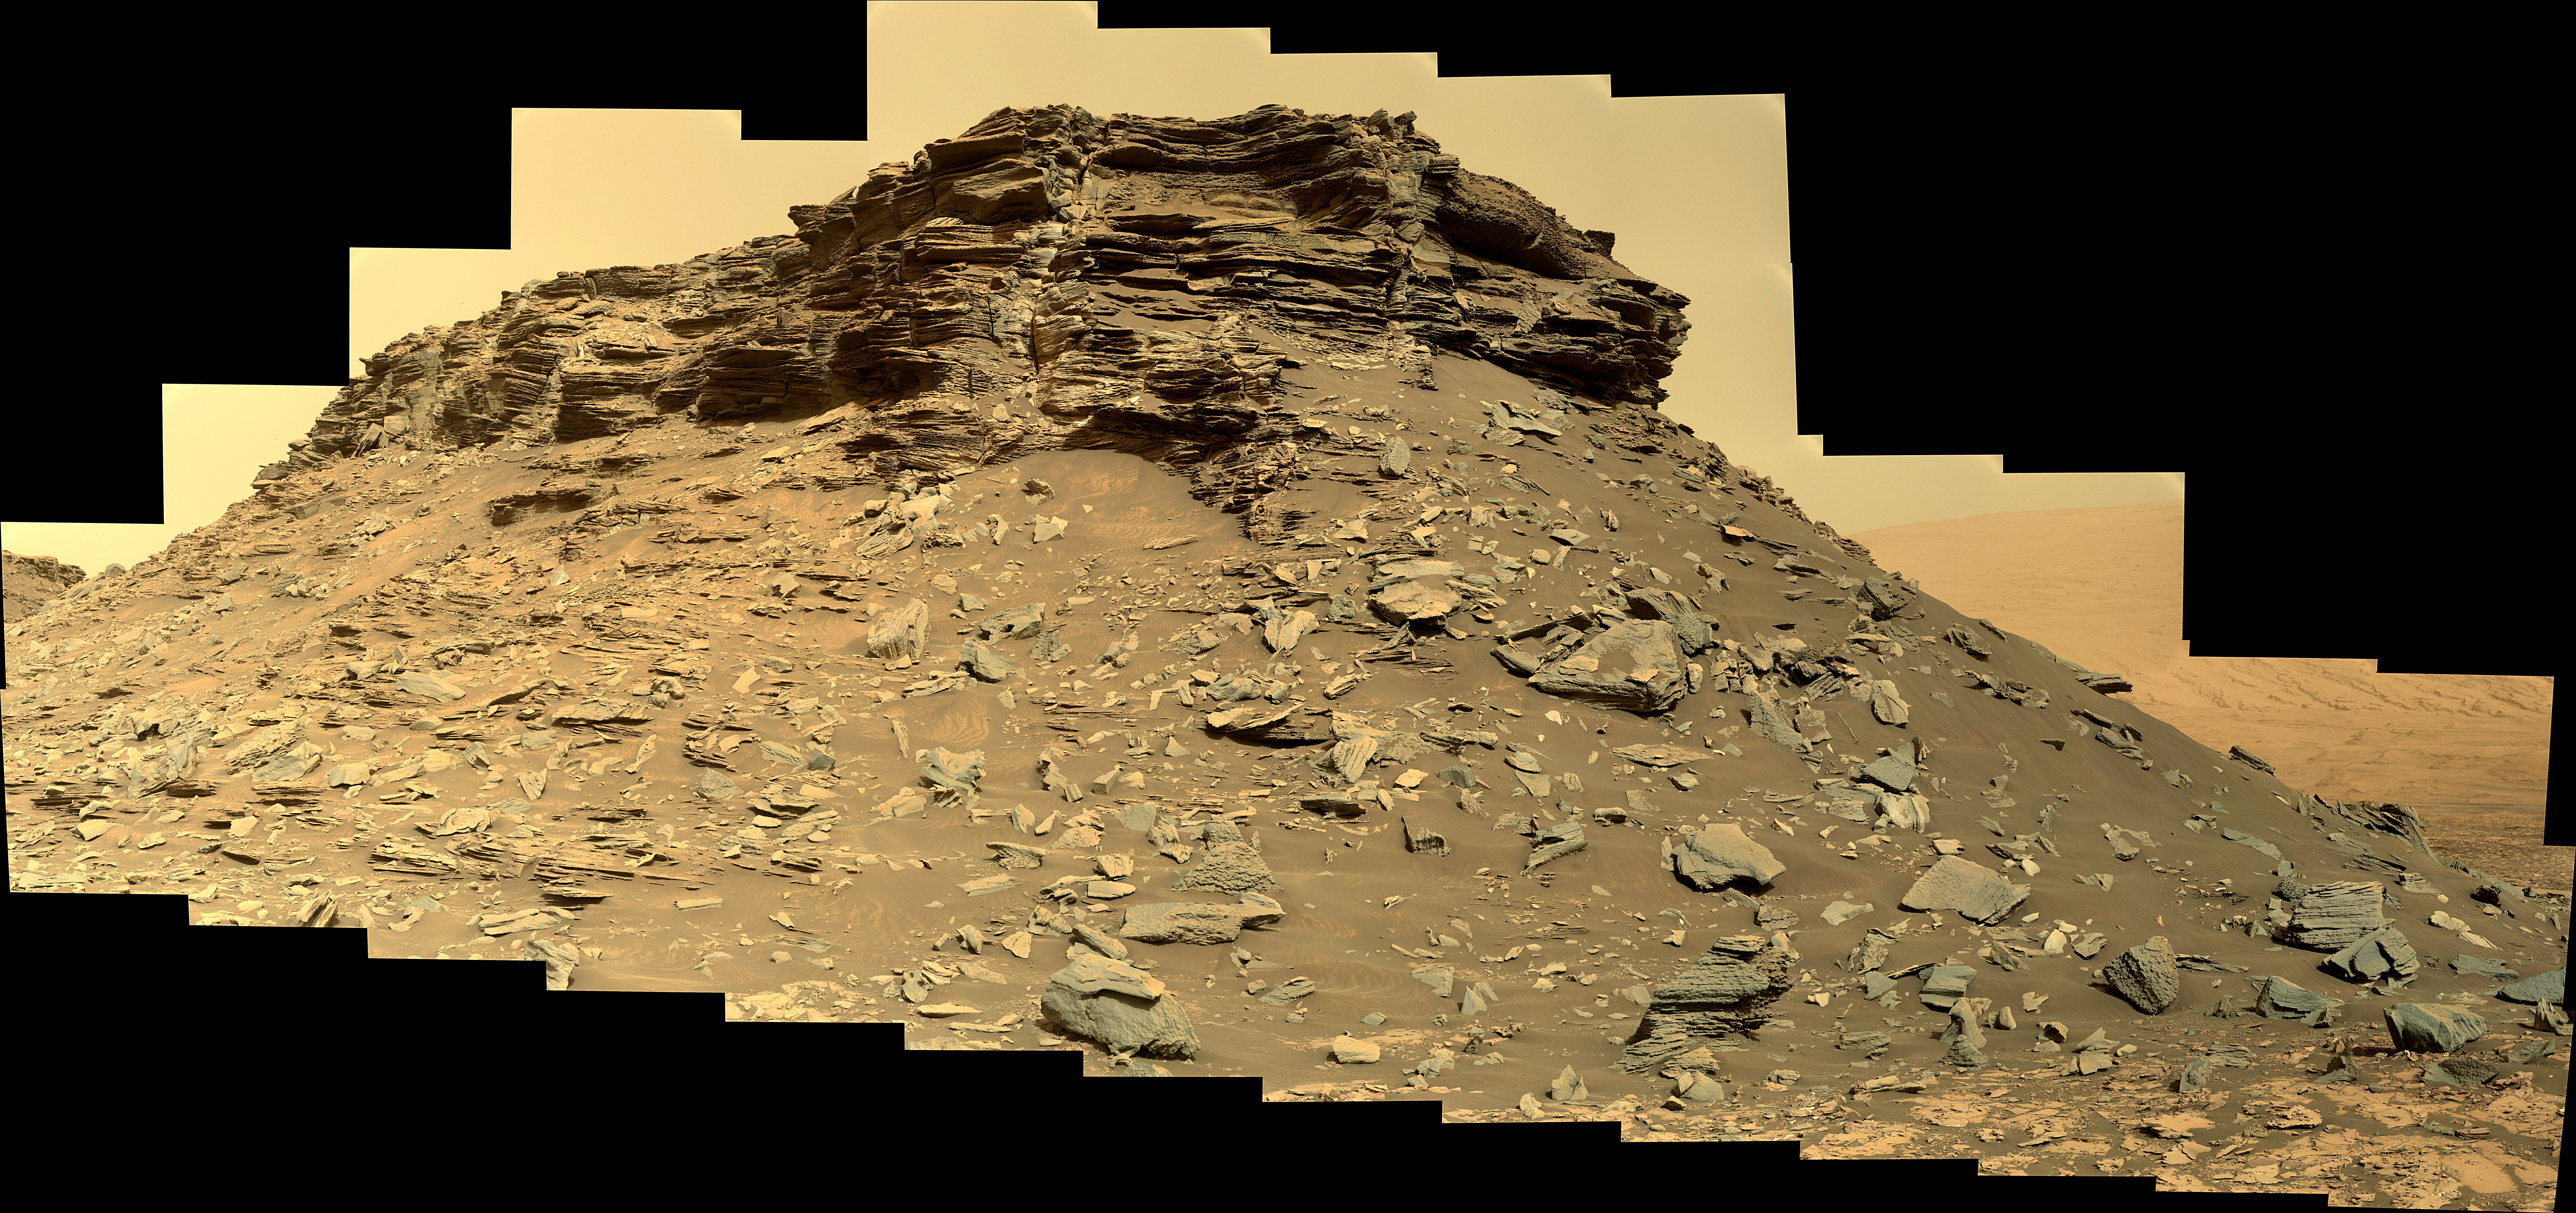 panoramic-curiosity-rover-view-1e-sol-1450-was-life-on-mars